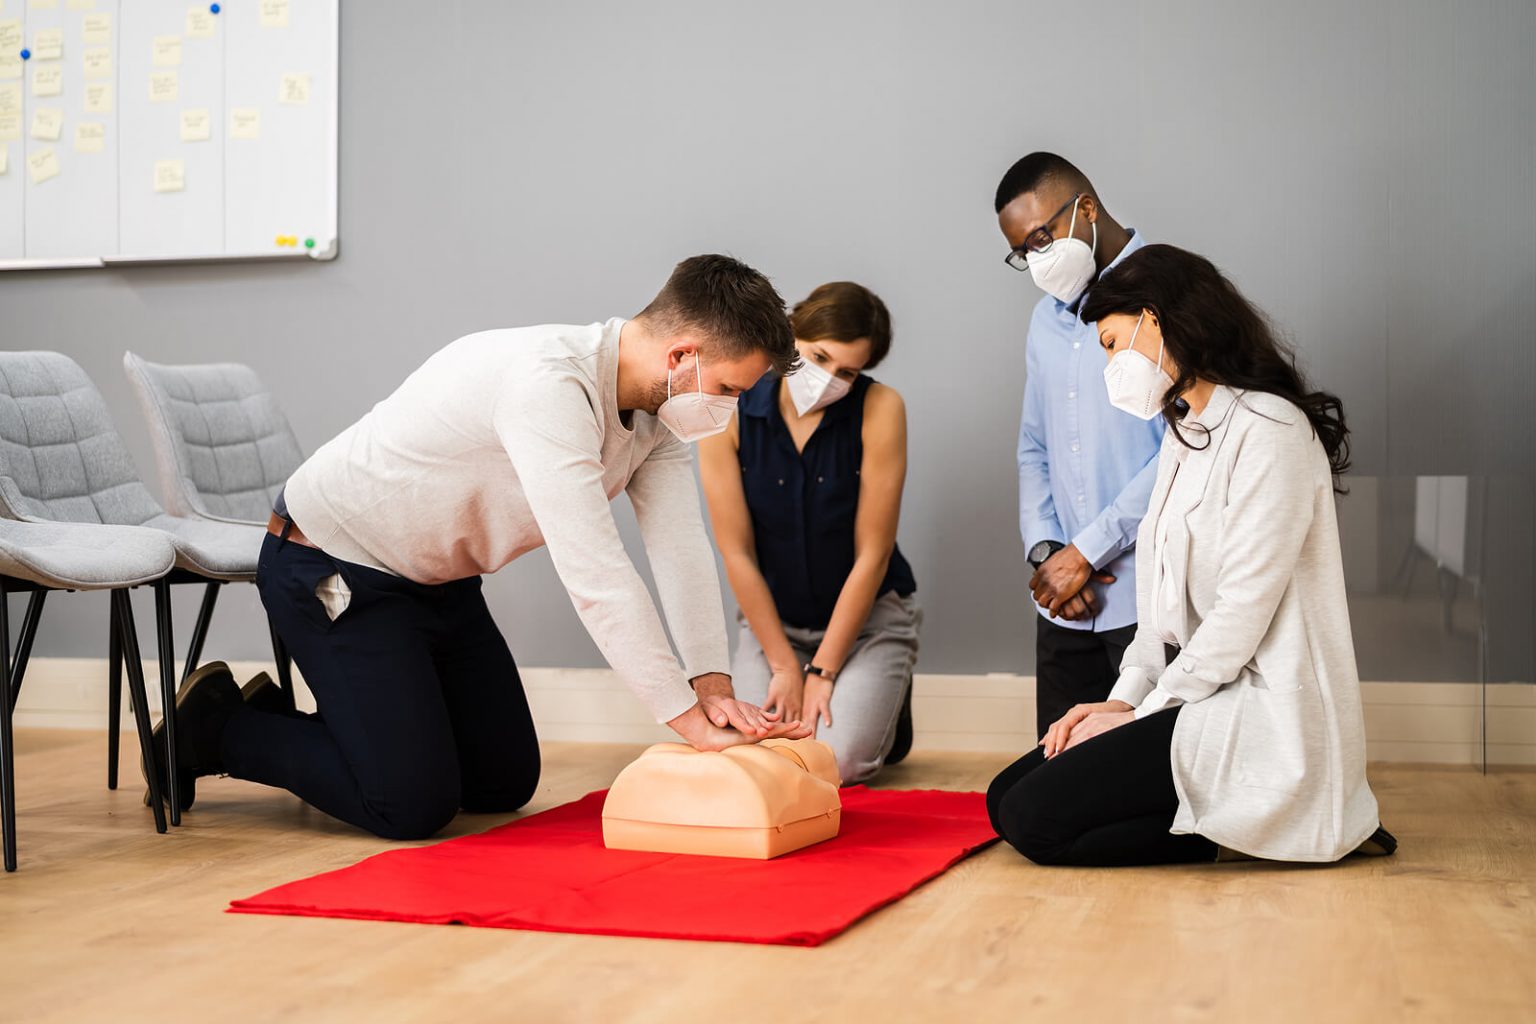 Employees getting CPR Certified